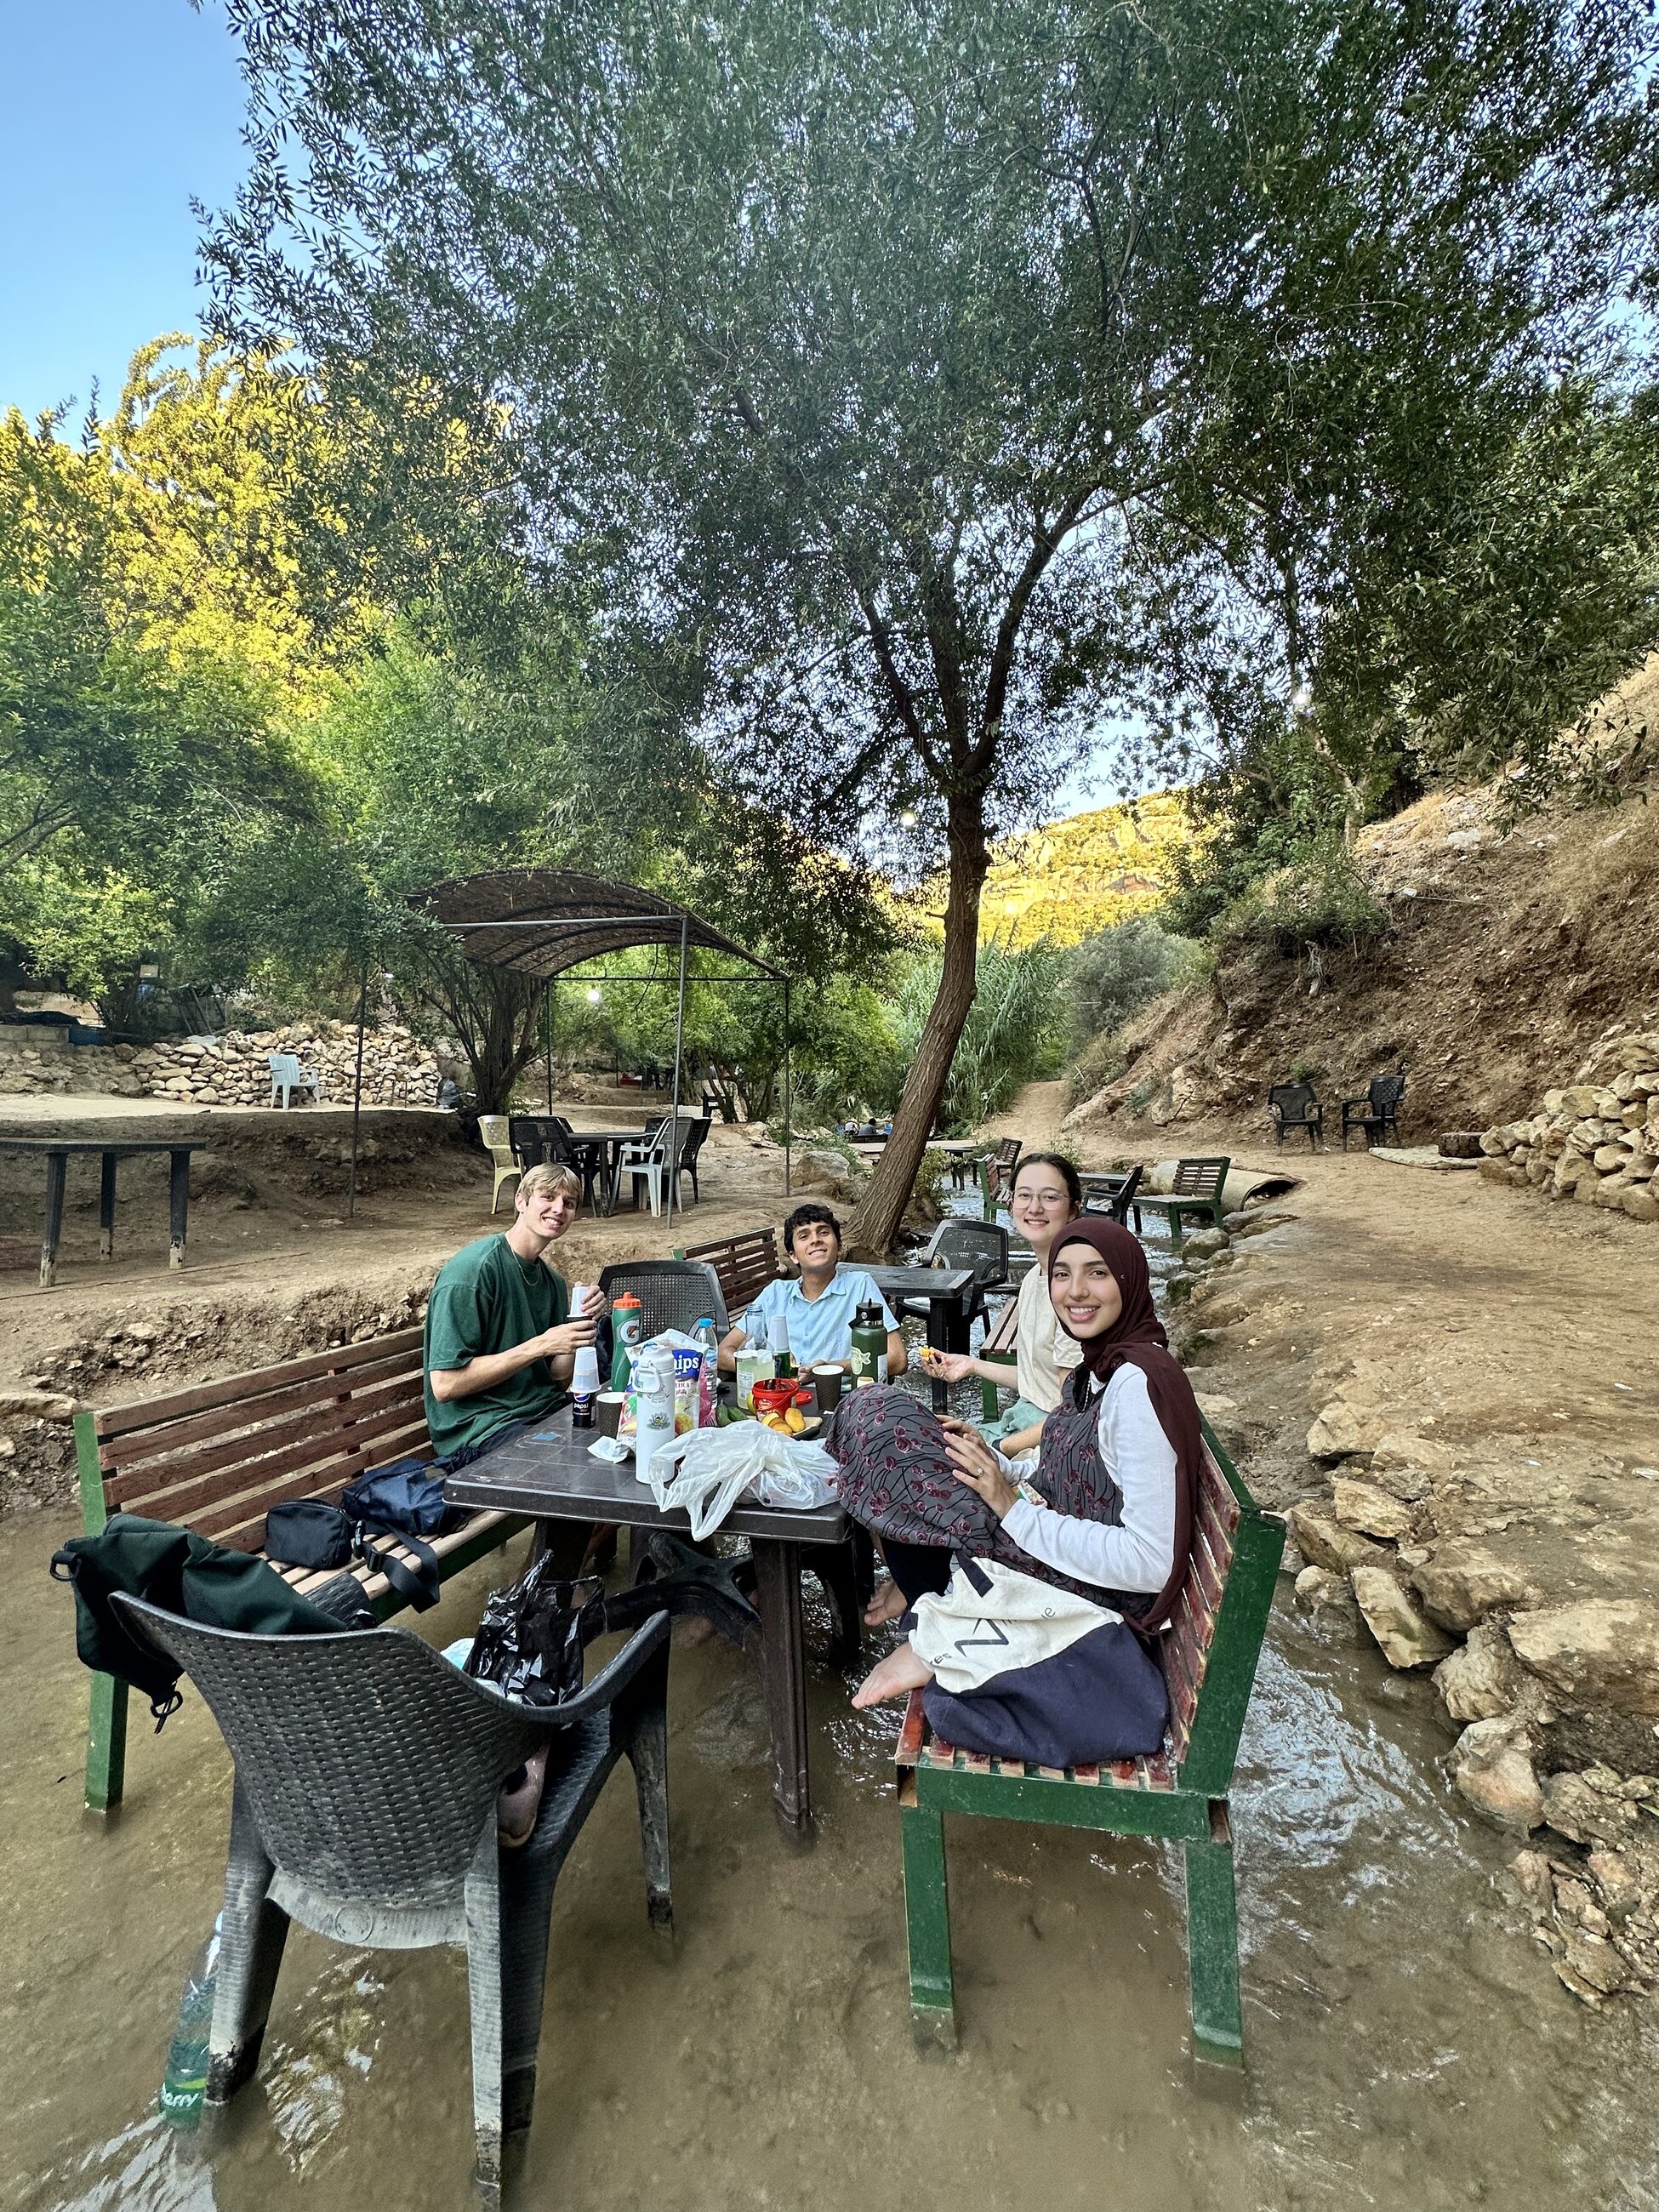 Picnicking with friends at a wadi in the north